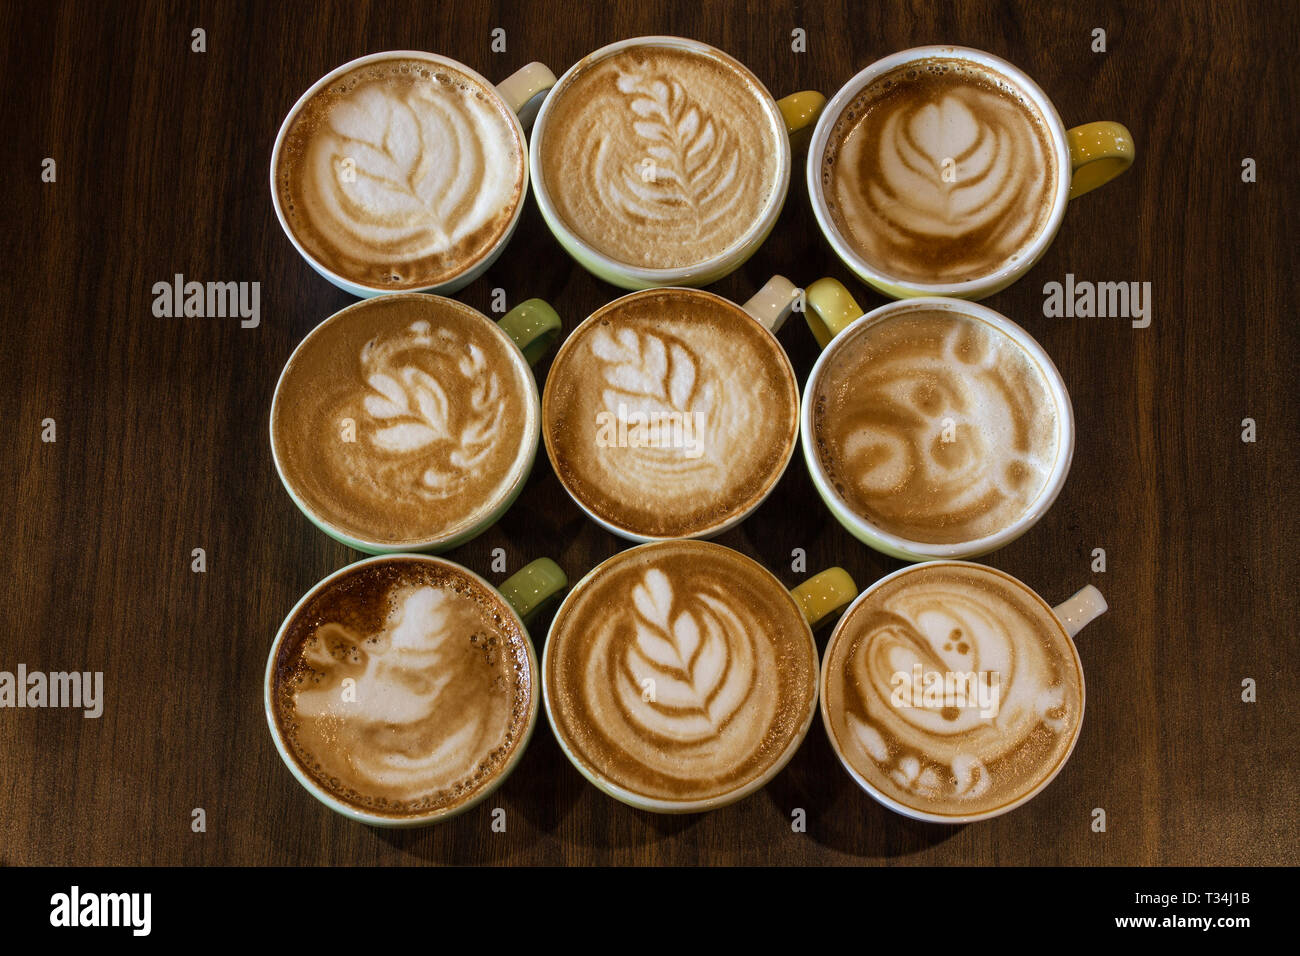 Nine cappuccino drinks with different froth decorations Stock Photo